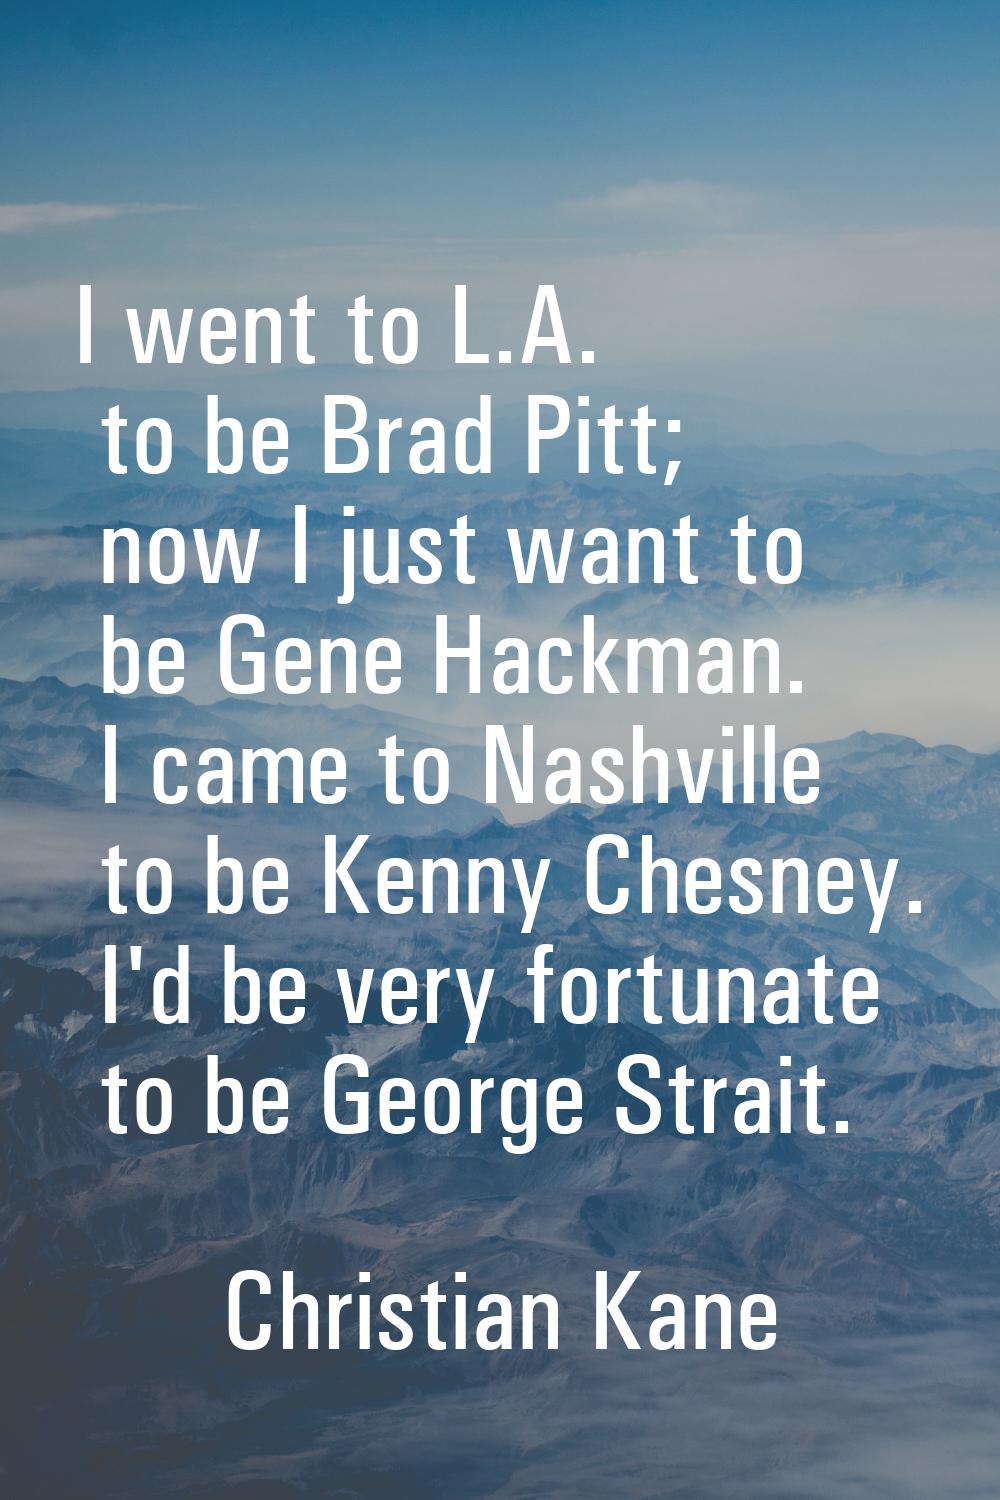 I went to L.A. to be Brad Pitt; now I just want to be Gene Hackman. I came to Nashville to be Kenny